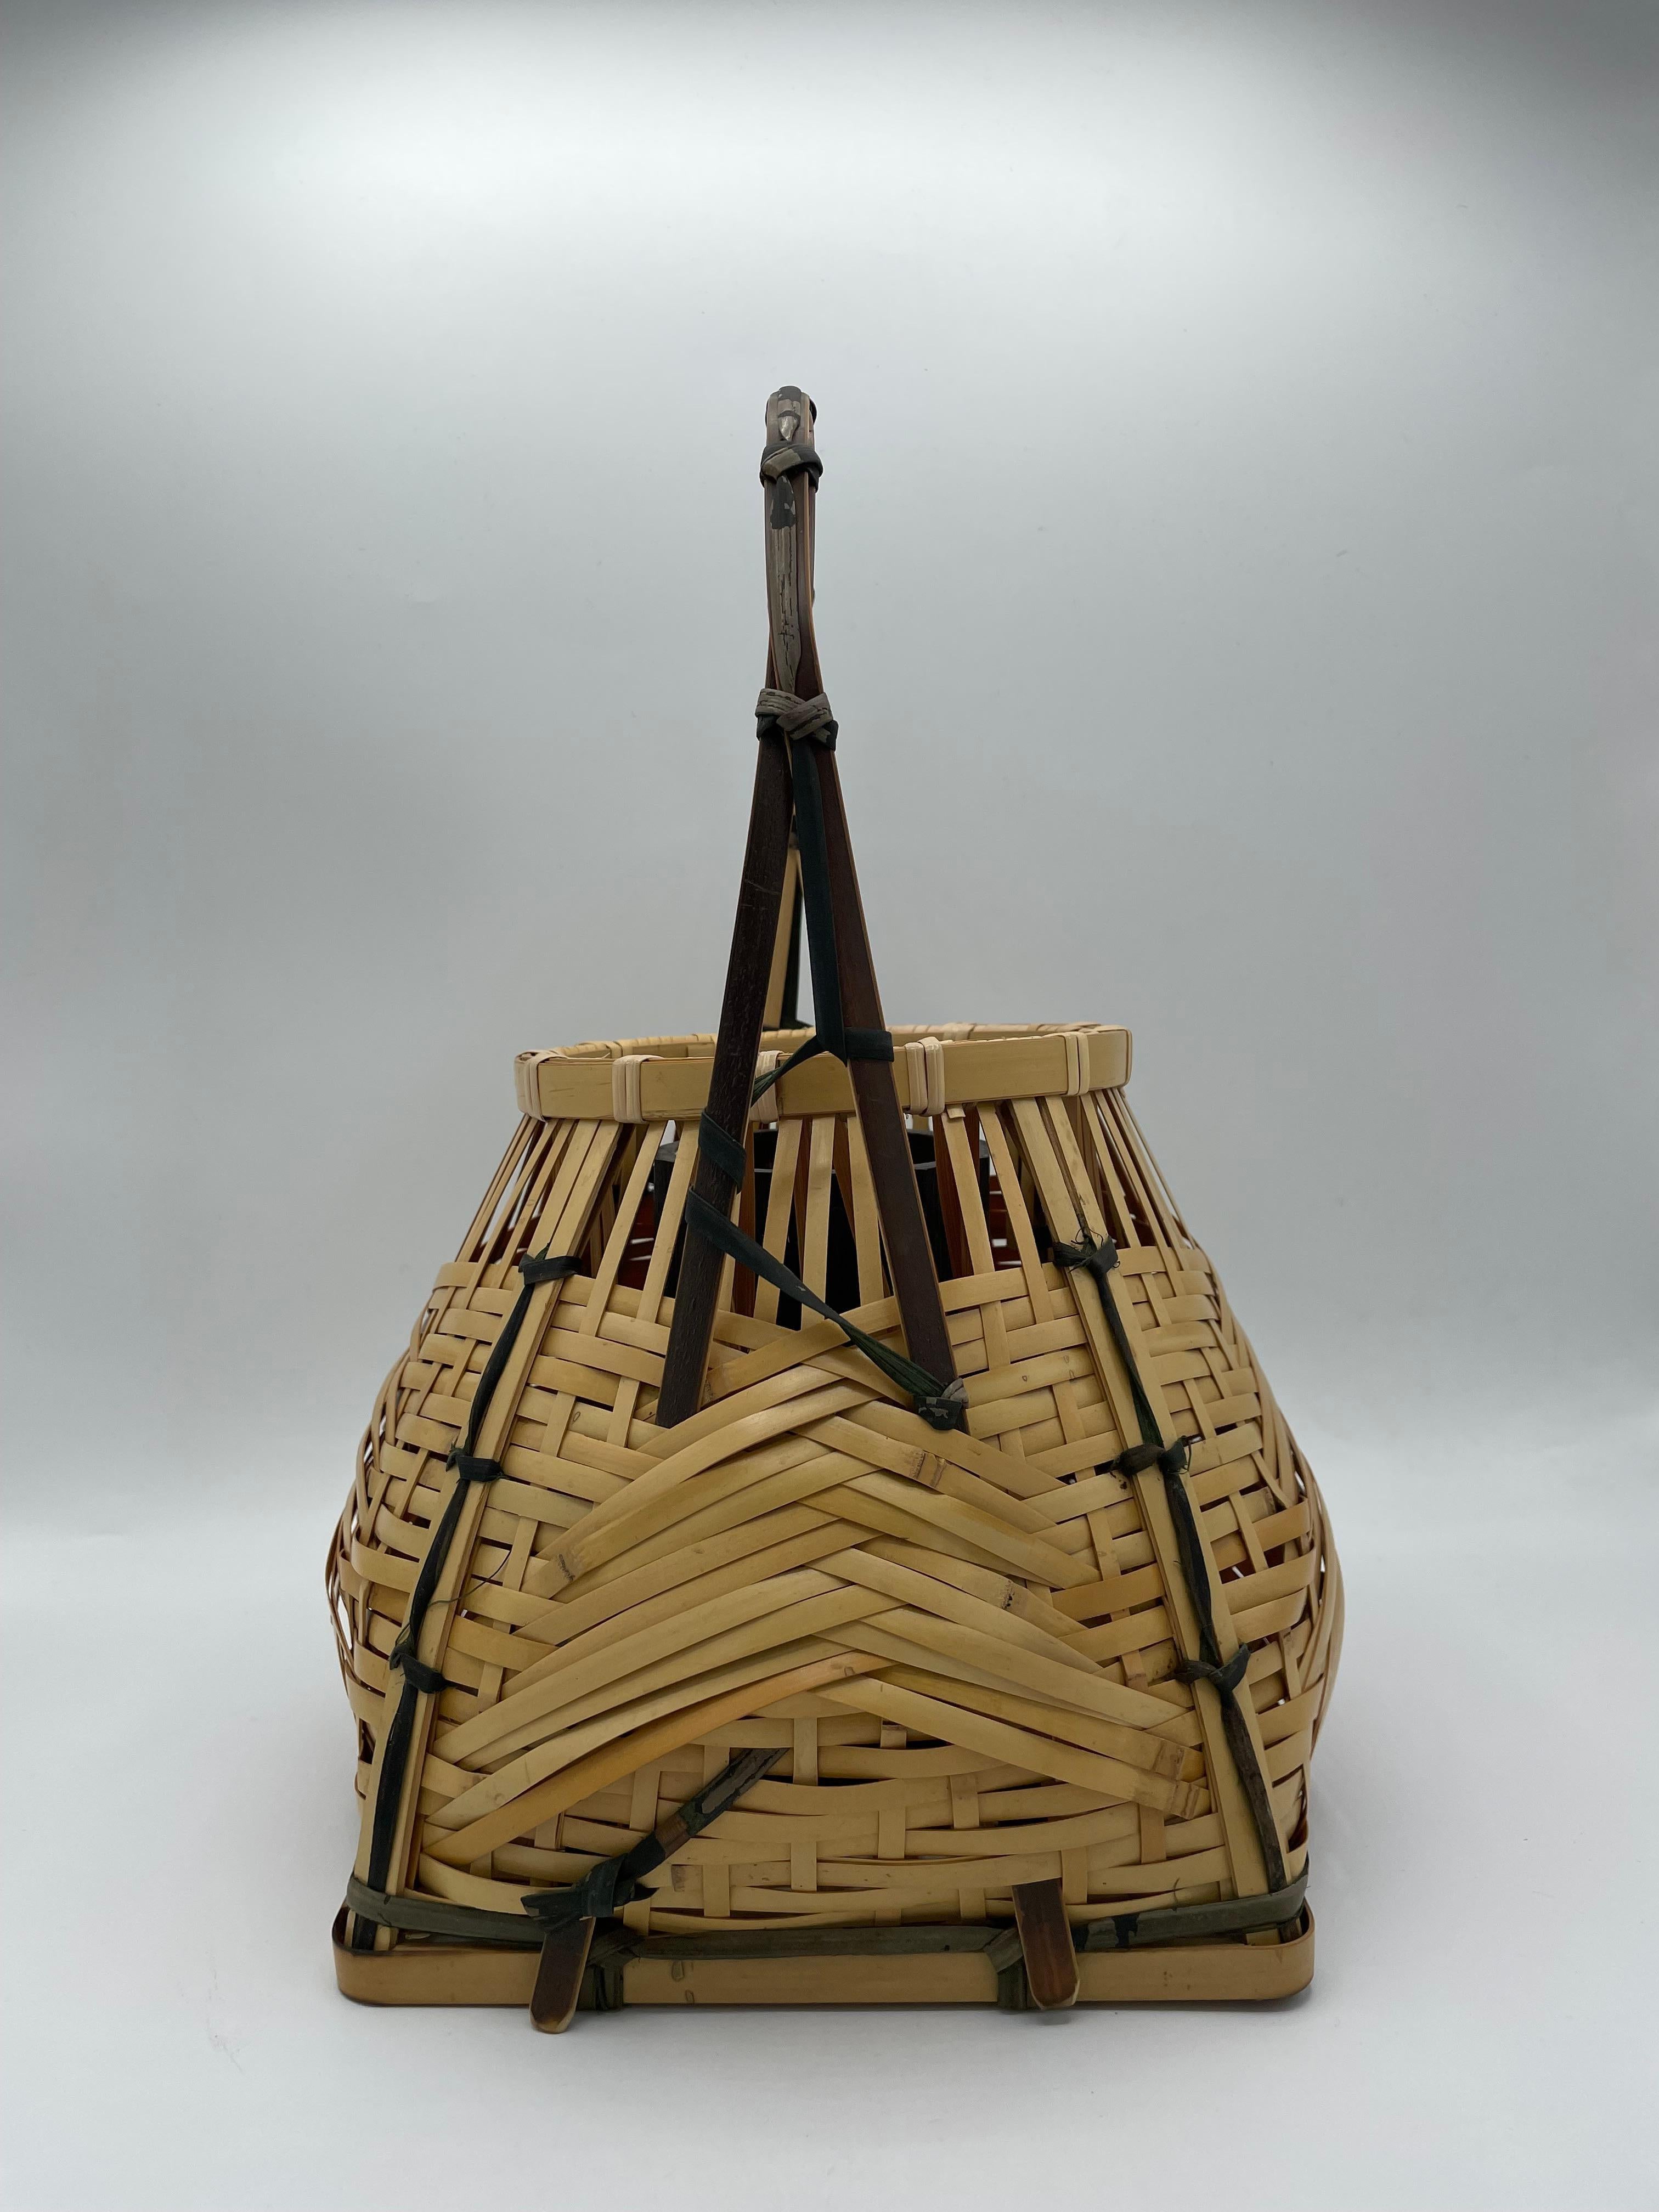 This is a bamboo basket called 'Souzen kago'.
Souzen kago was liked by Souzen HISADA. It is famous by the shape, the bottom is a rectangle and the top is a circle shape. 
This basket was made by Chikusei. 

It was used to use for the tea ceremony.